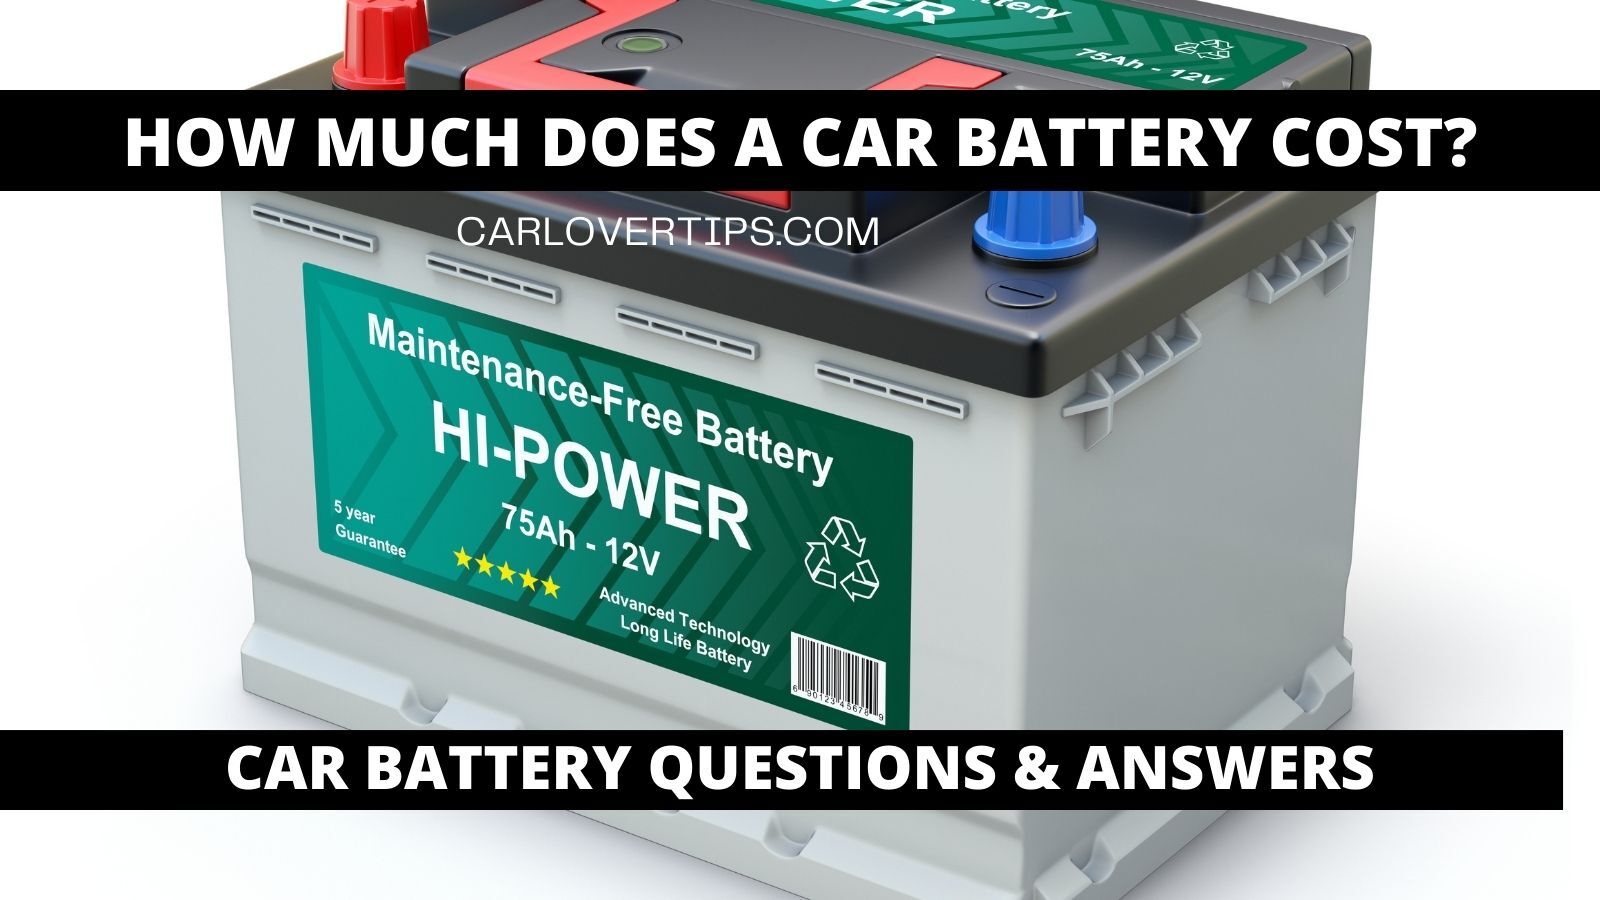 How Much Does a Car Battery Cost Car Lover Tips